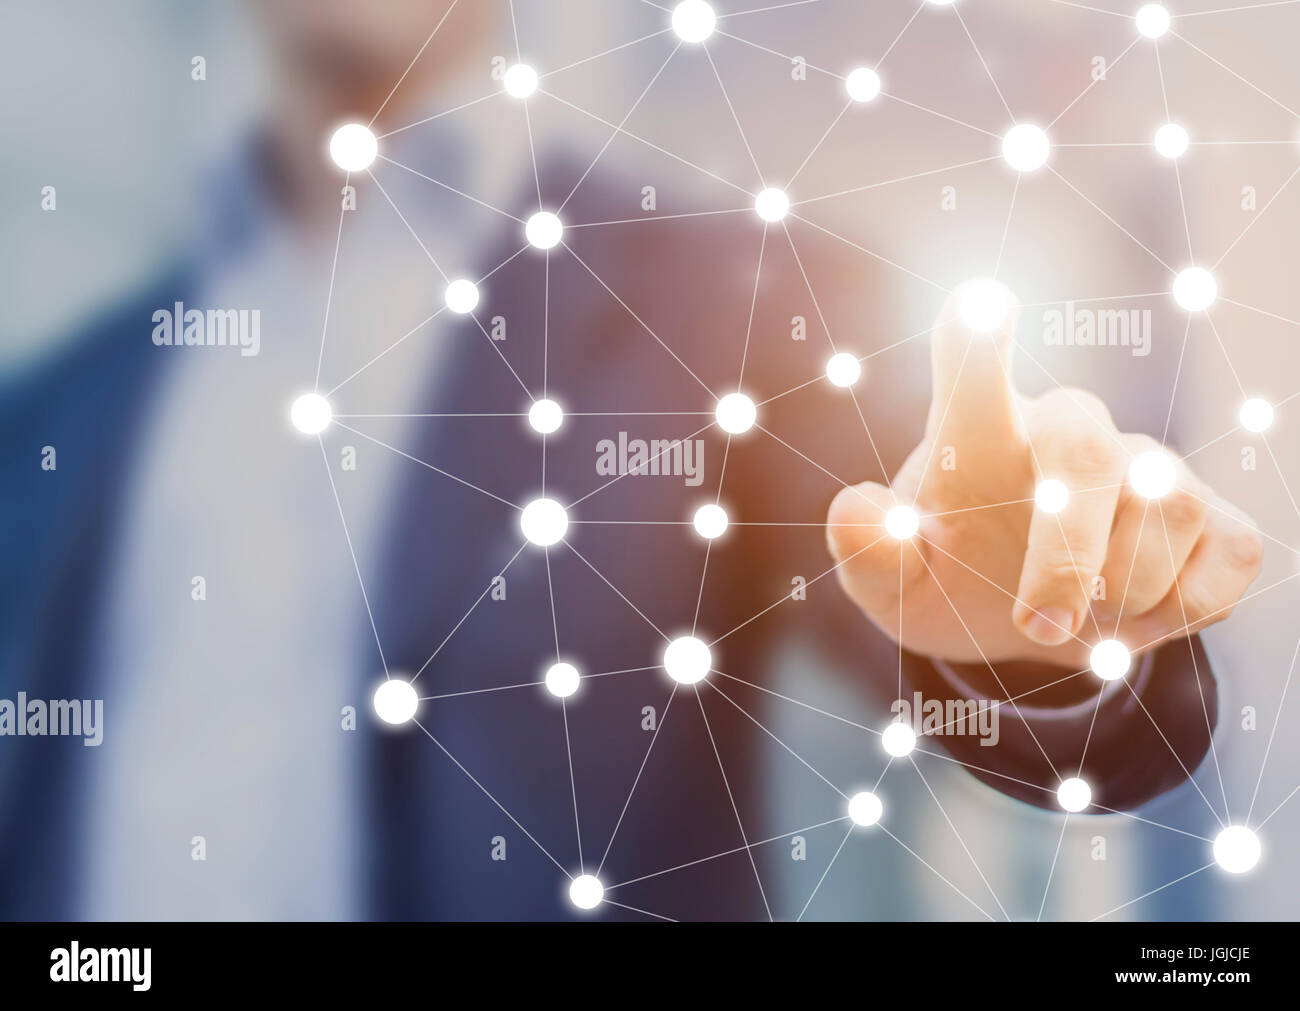 Person touching a network chart showing connections between nodes or servers, concept about the world wide web internet and data communications Stock Photo